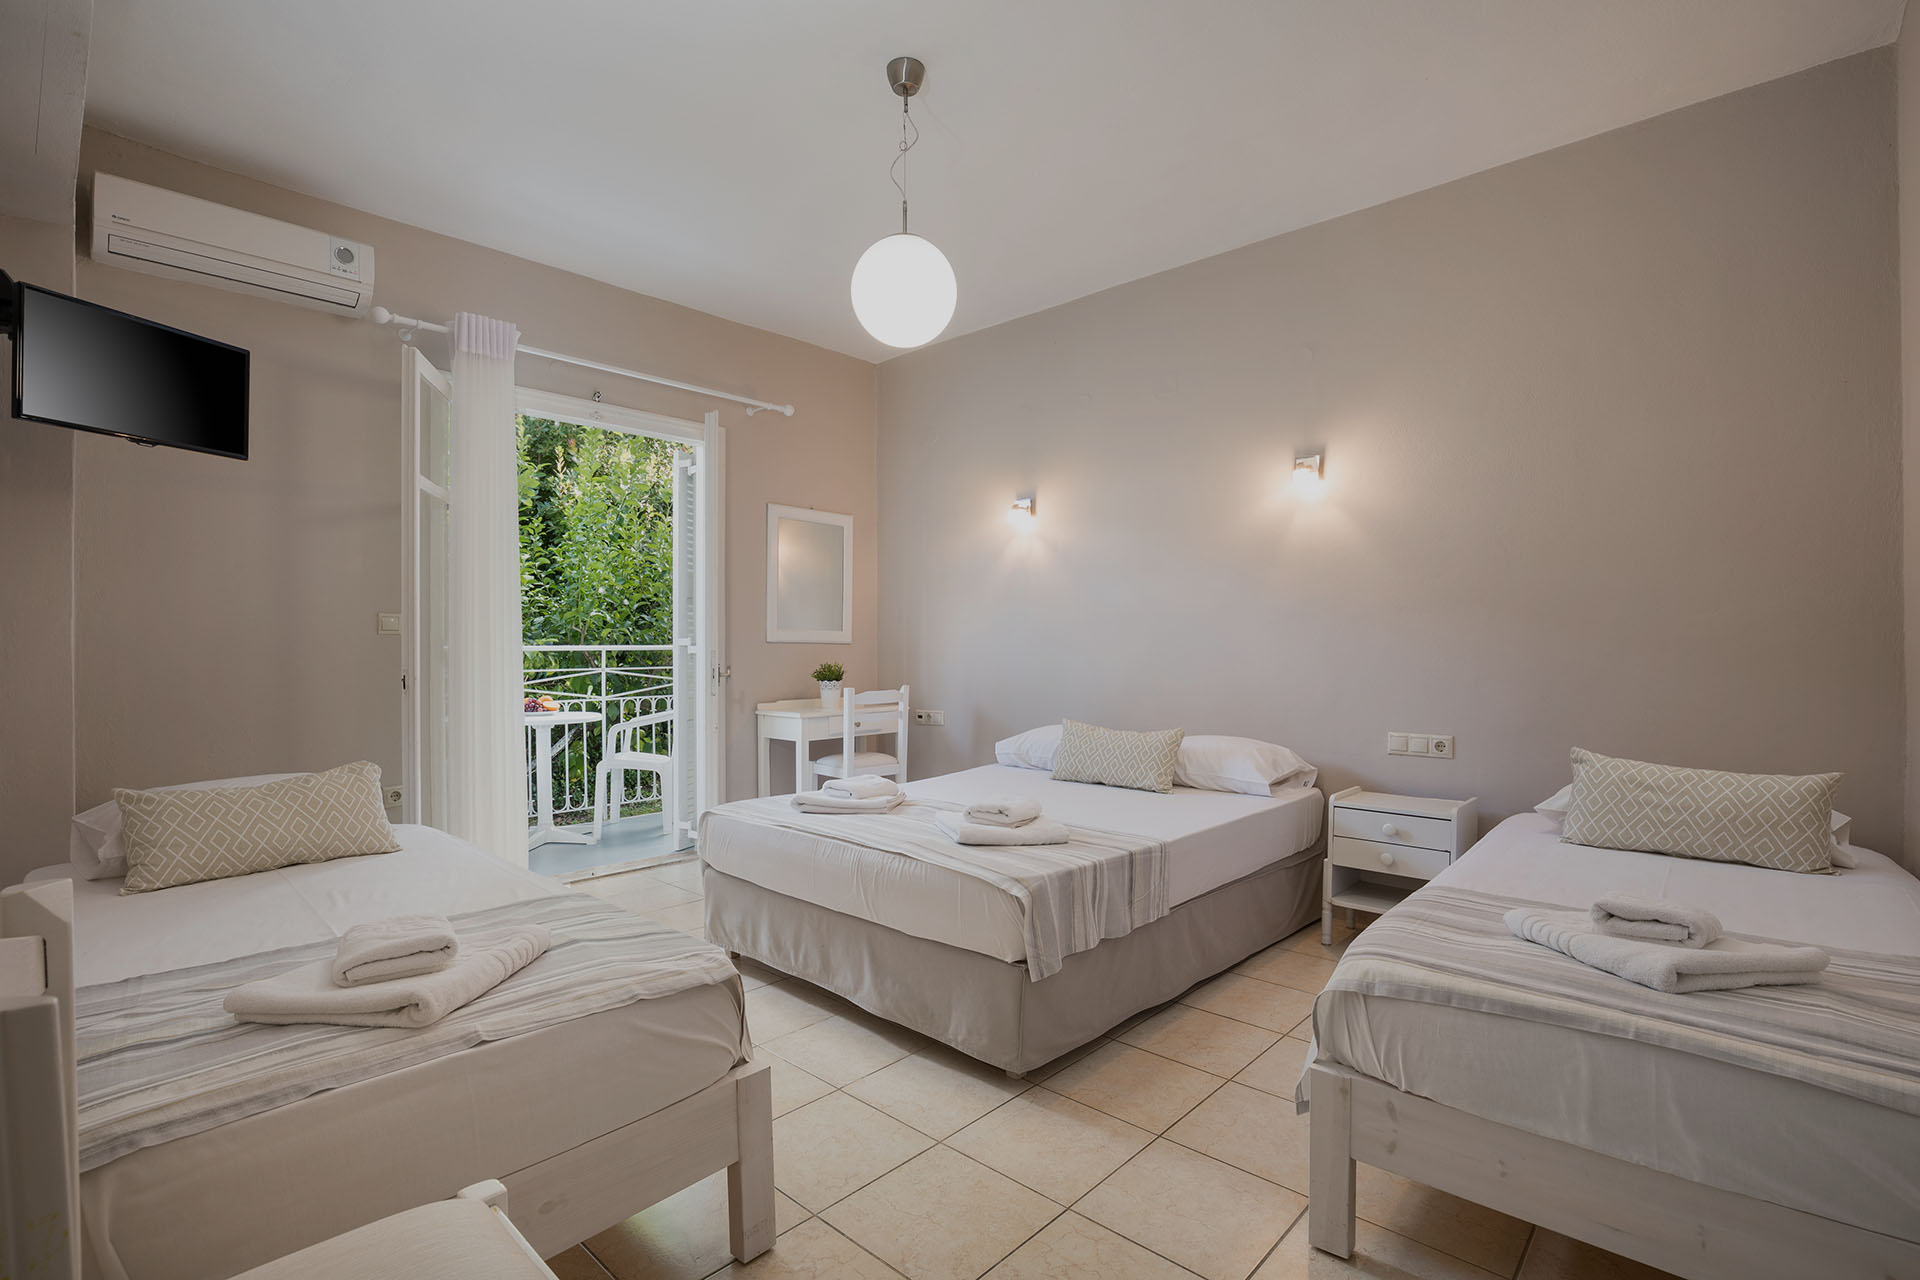 Accommodation for families in Corfu